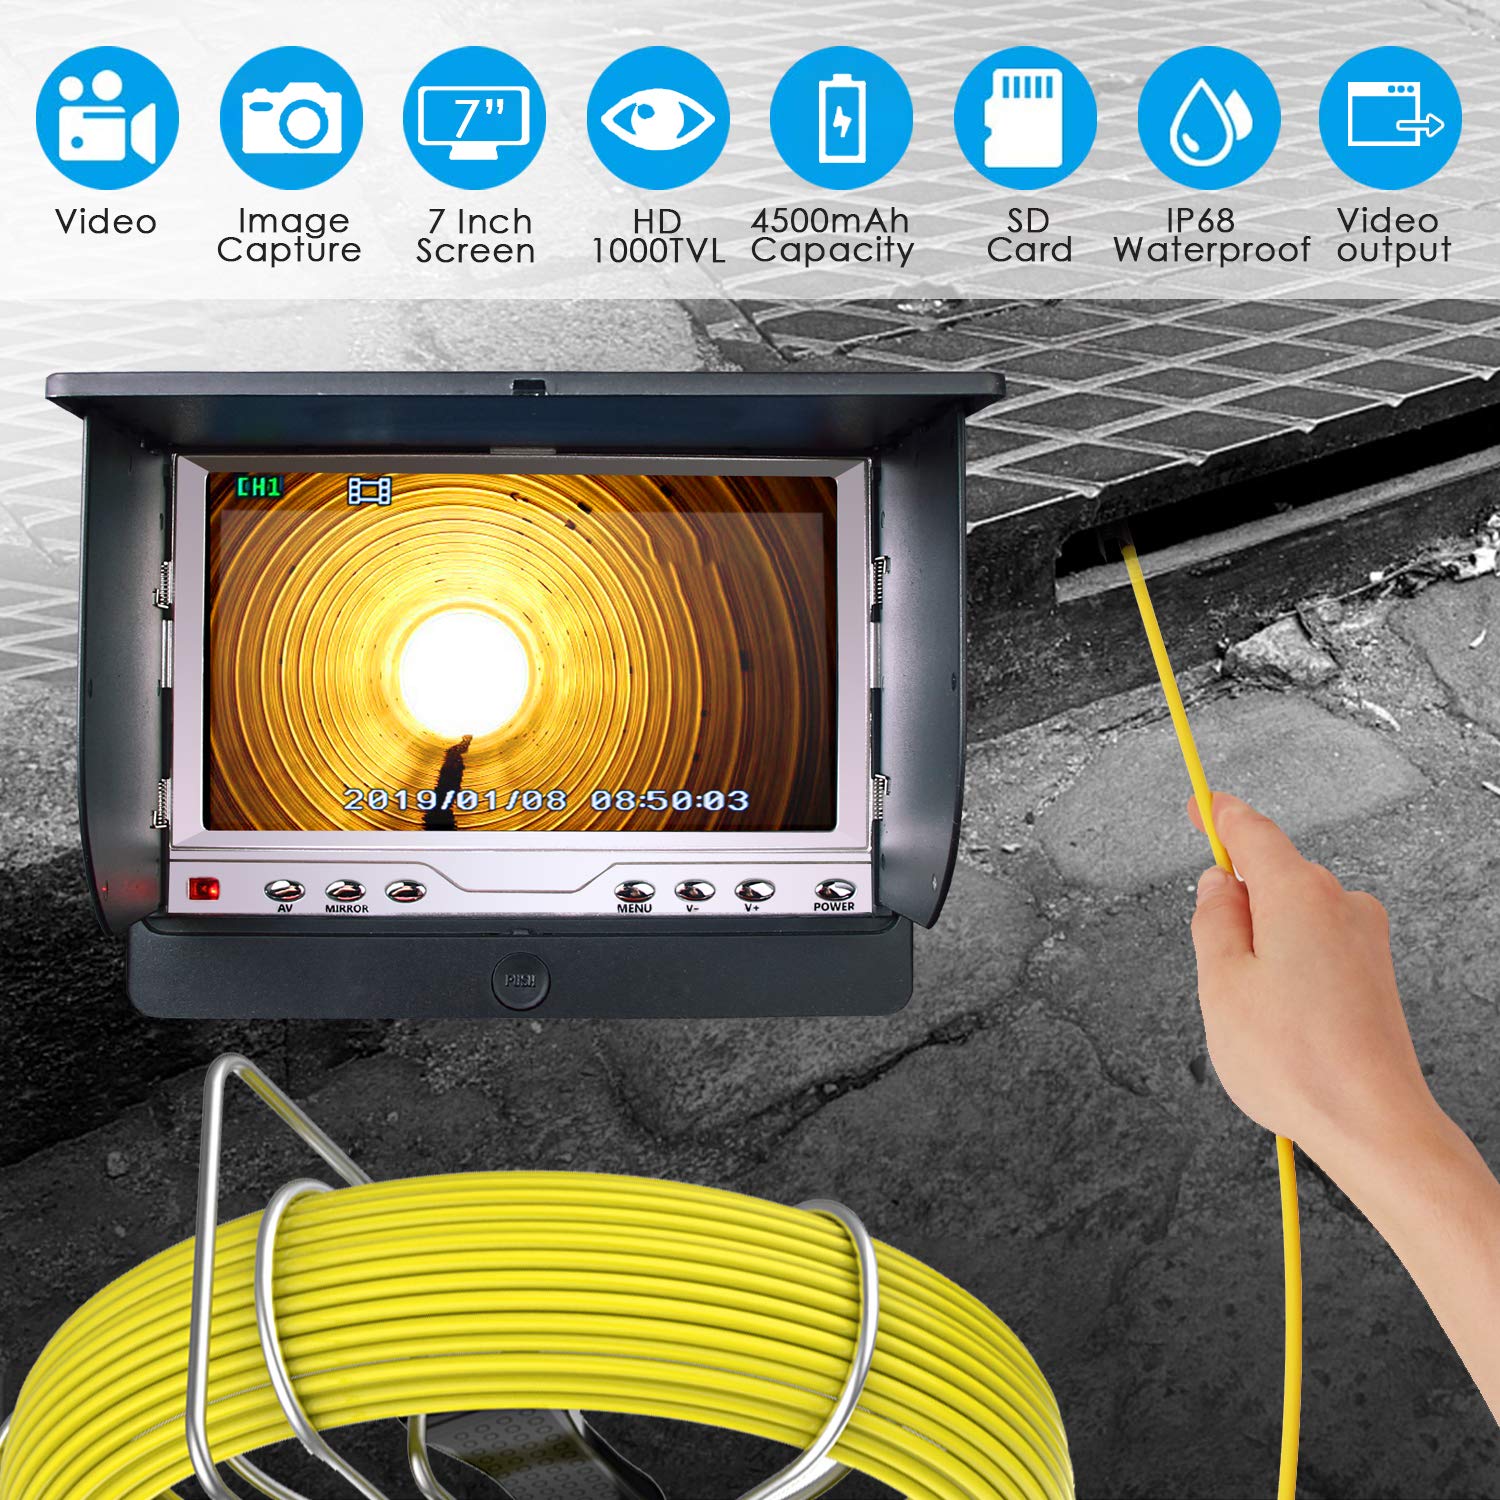 30M-DVR Inspection Camera Drain Sewer Industrial Endoscope IP68 Waterproof with Distance Counter 30M/100FT Cable Video Inspection Scope with 7 Inch TFT LCD Color Monitor 